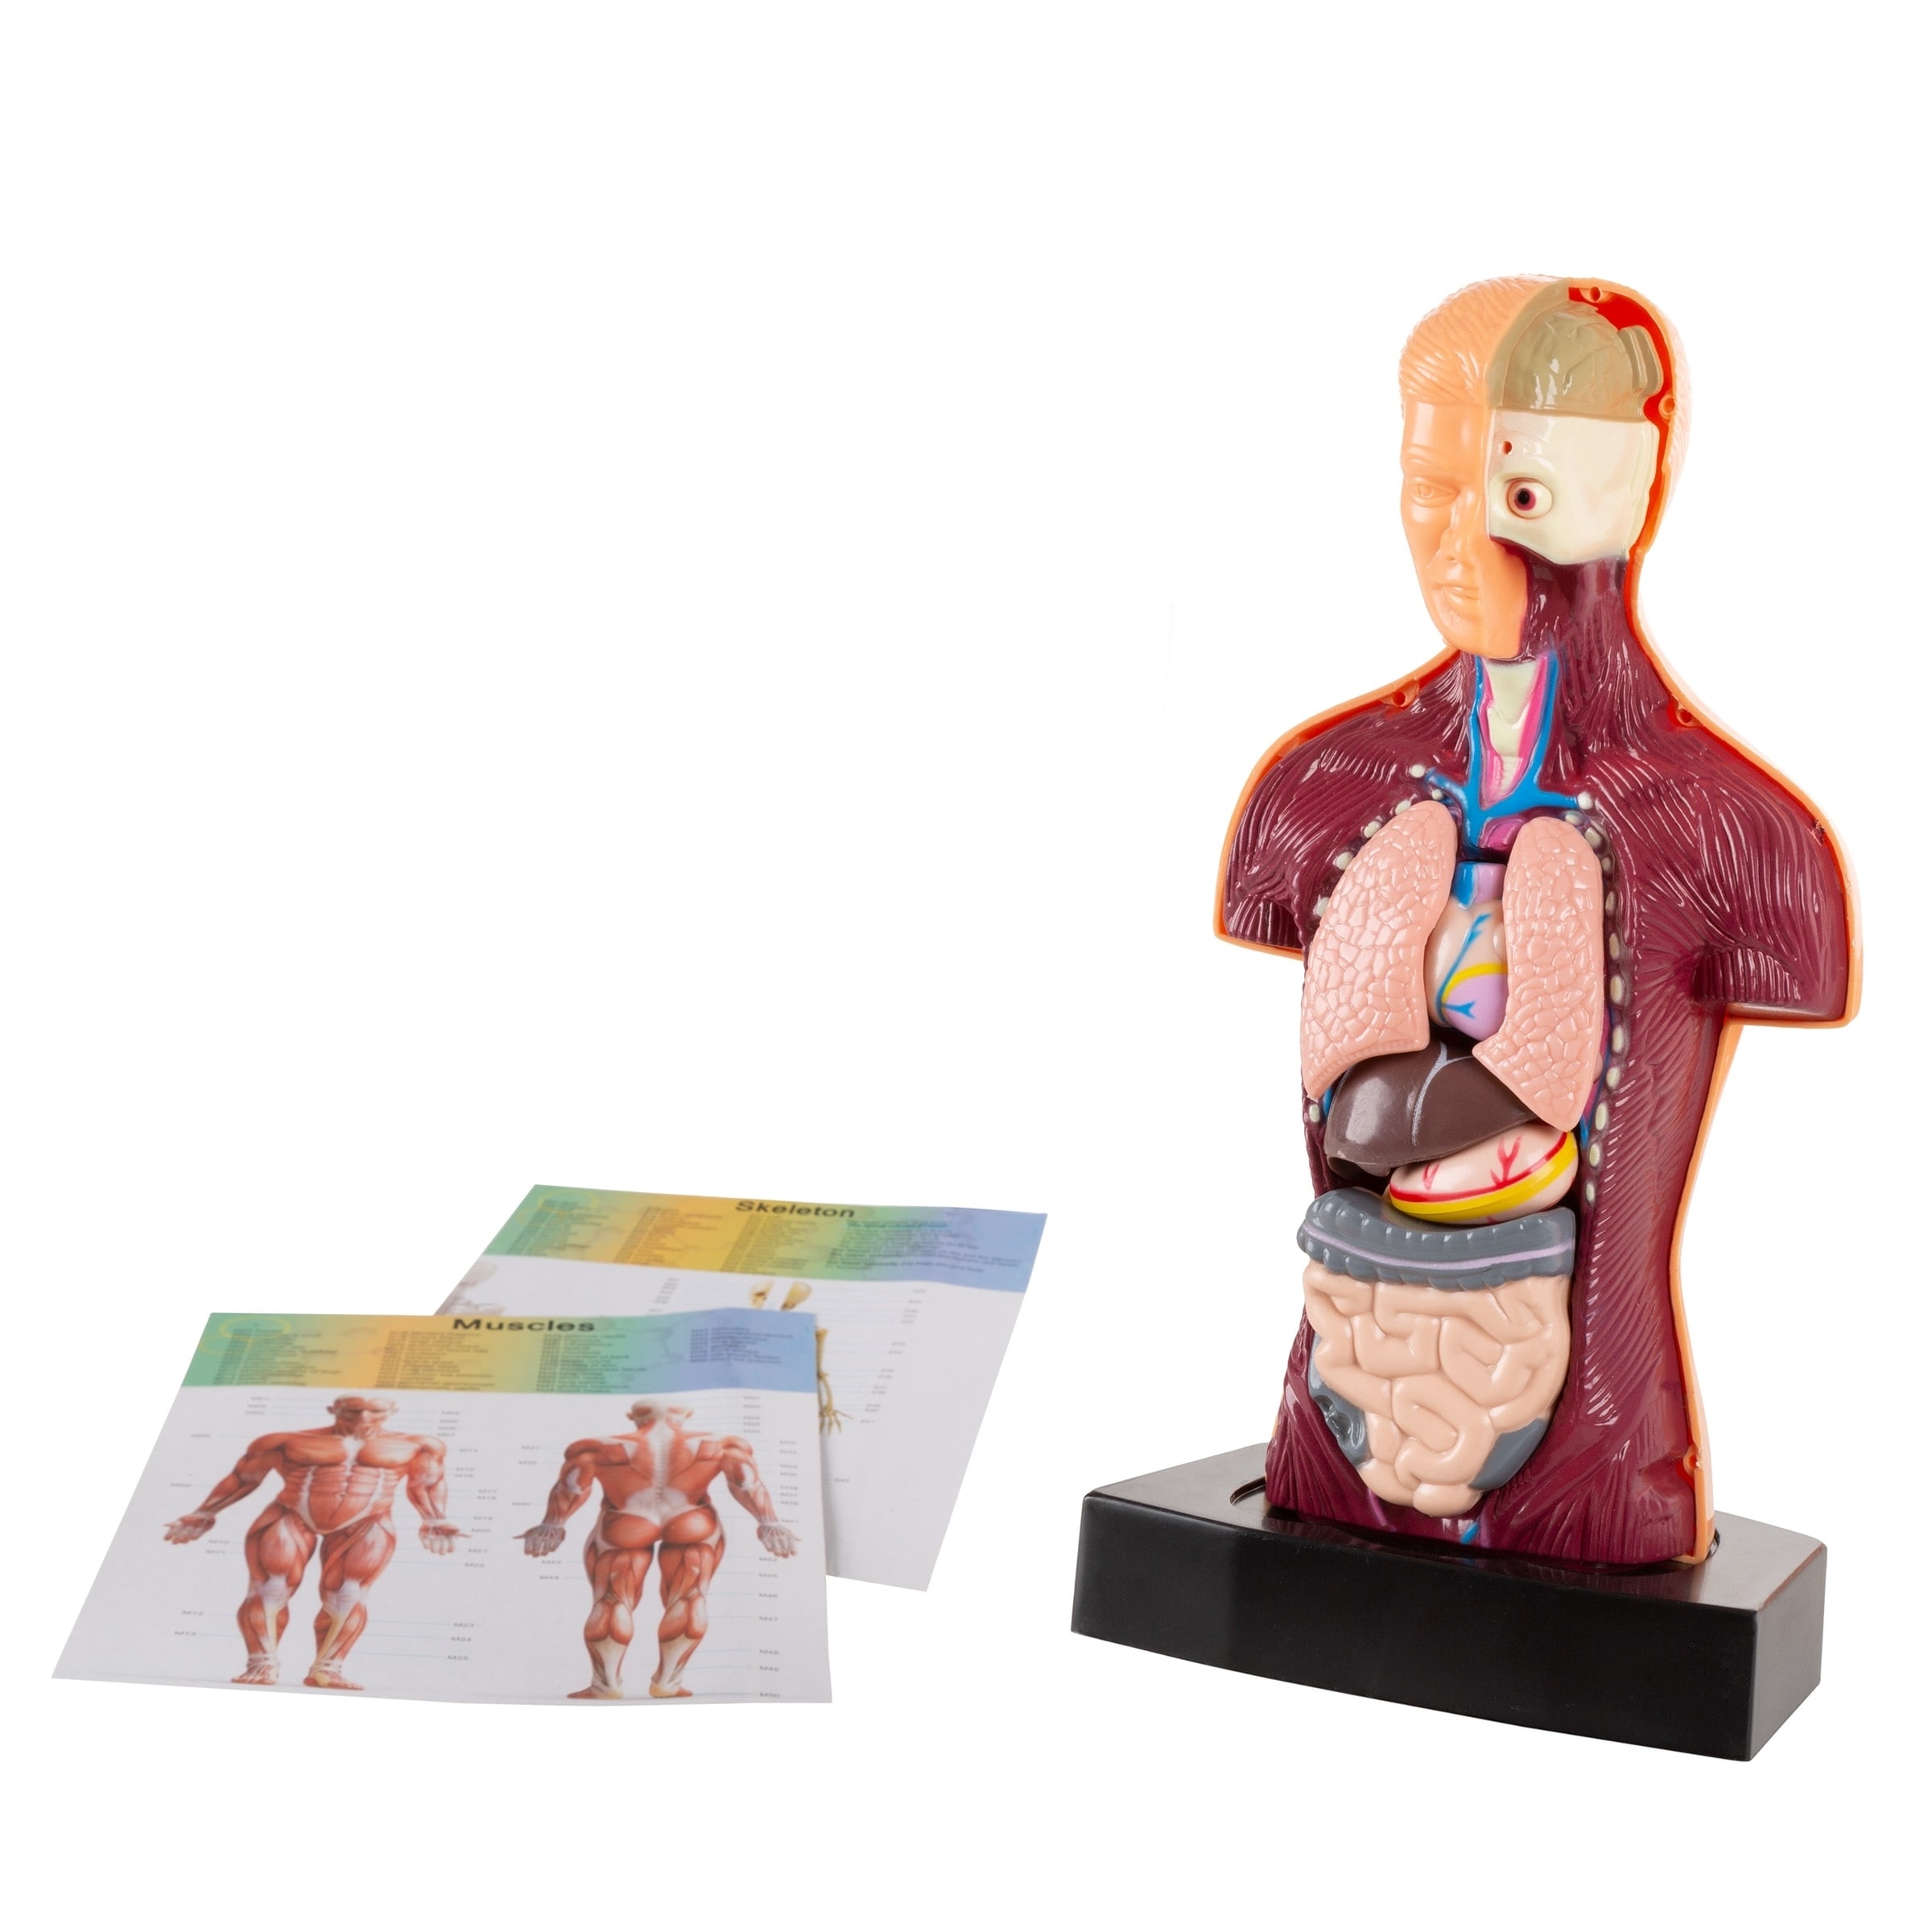 Anatomy Model Human Body Torso With Removable Organs For Science And Medical Laboratory Learning By Hey Play On Sale Overstock